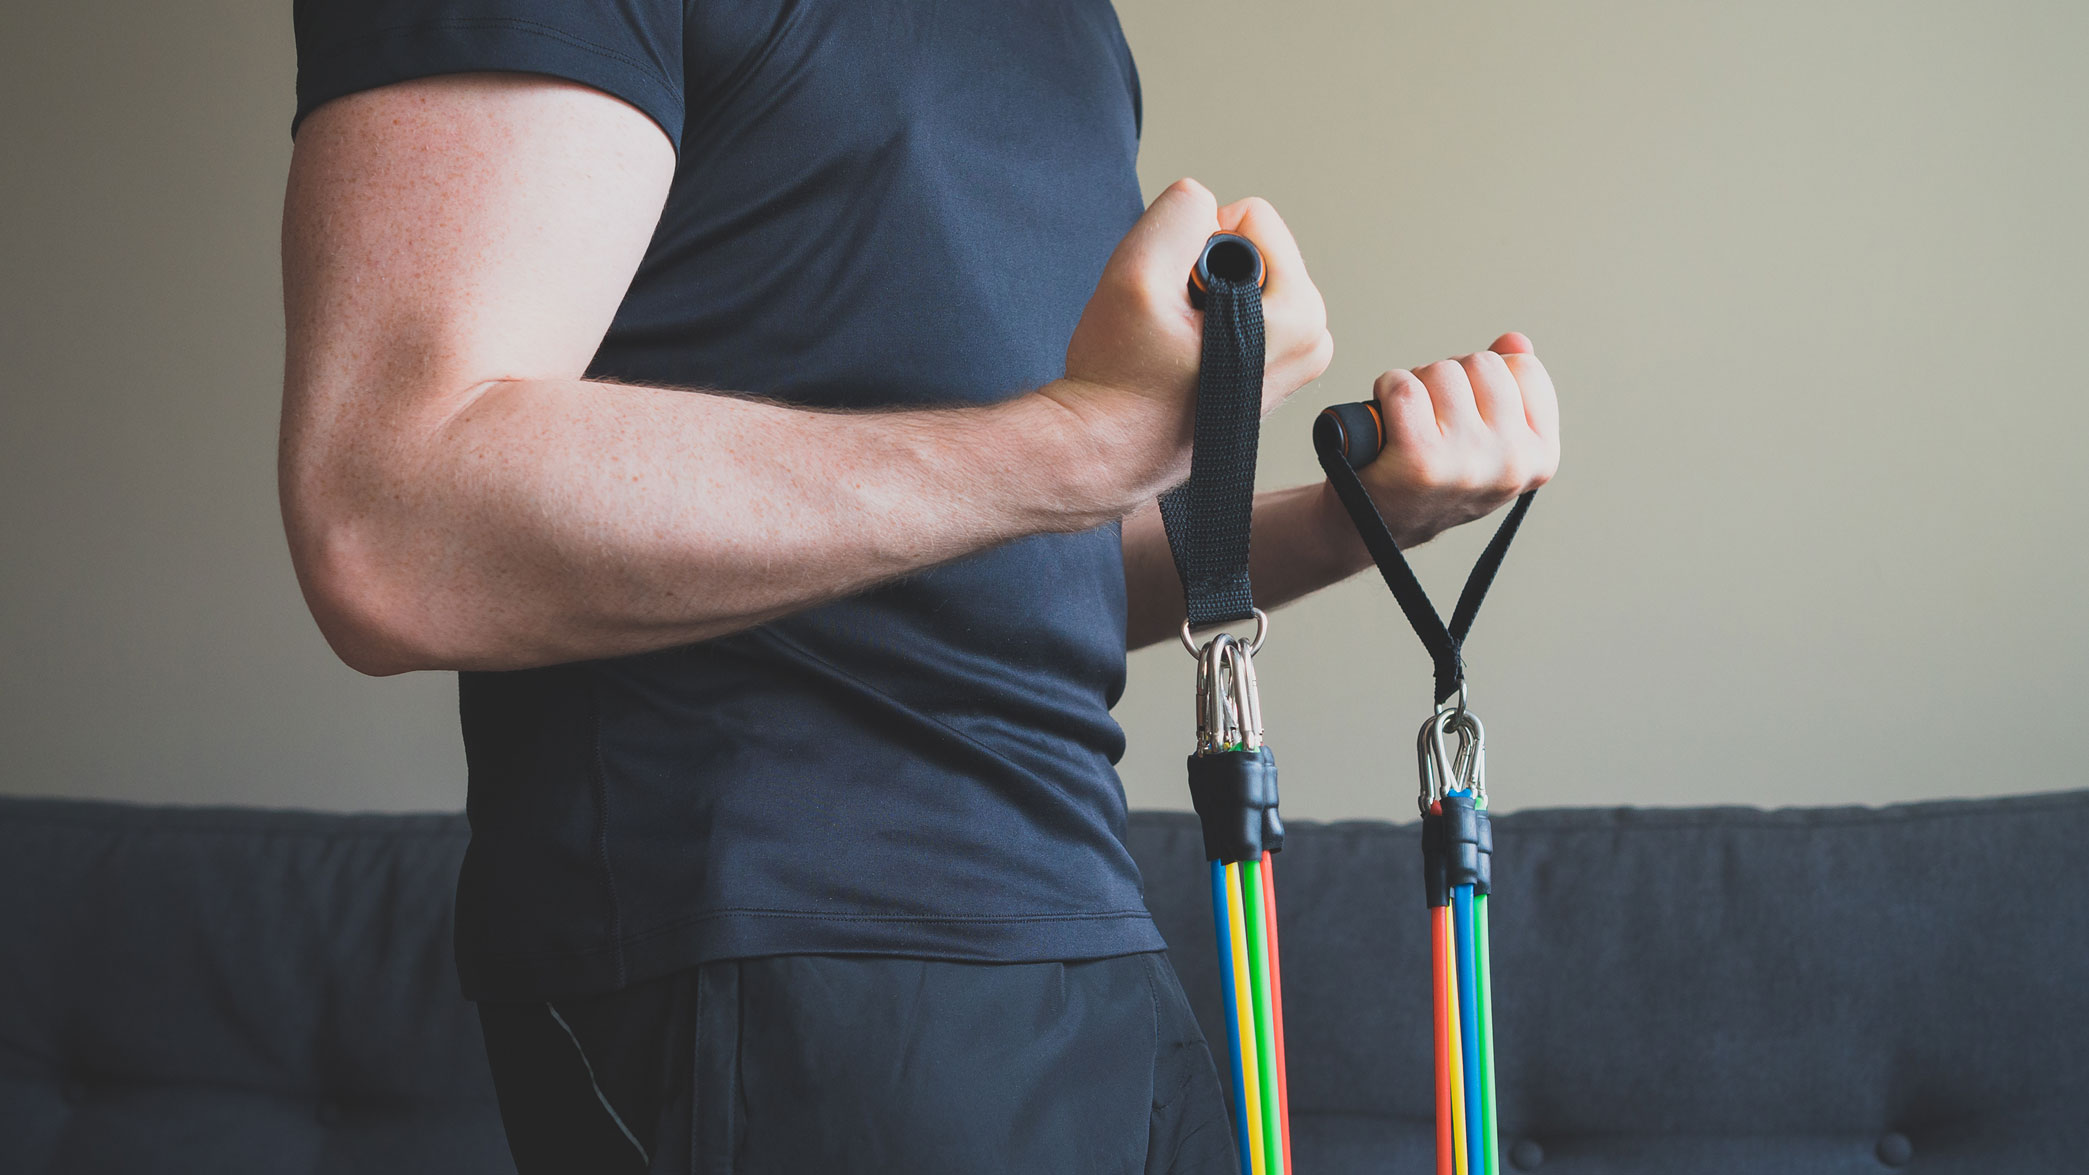 Every fitness beginner needs a resistance bands set for big gains